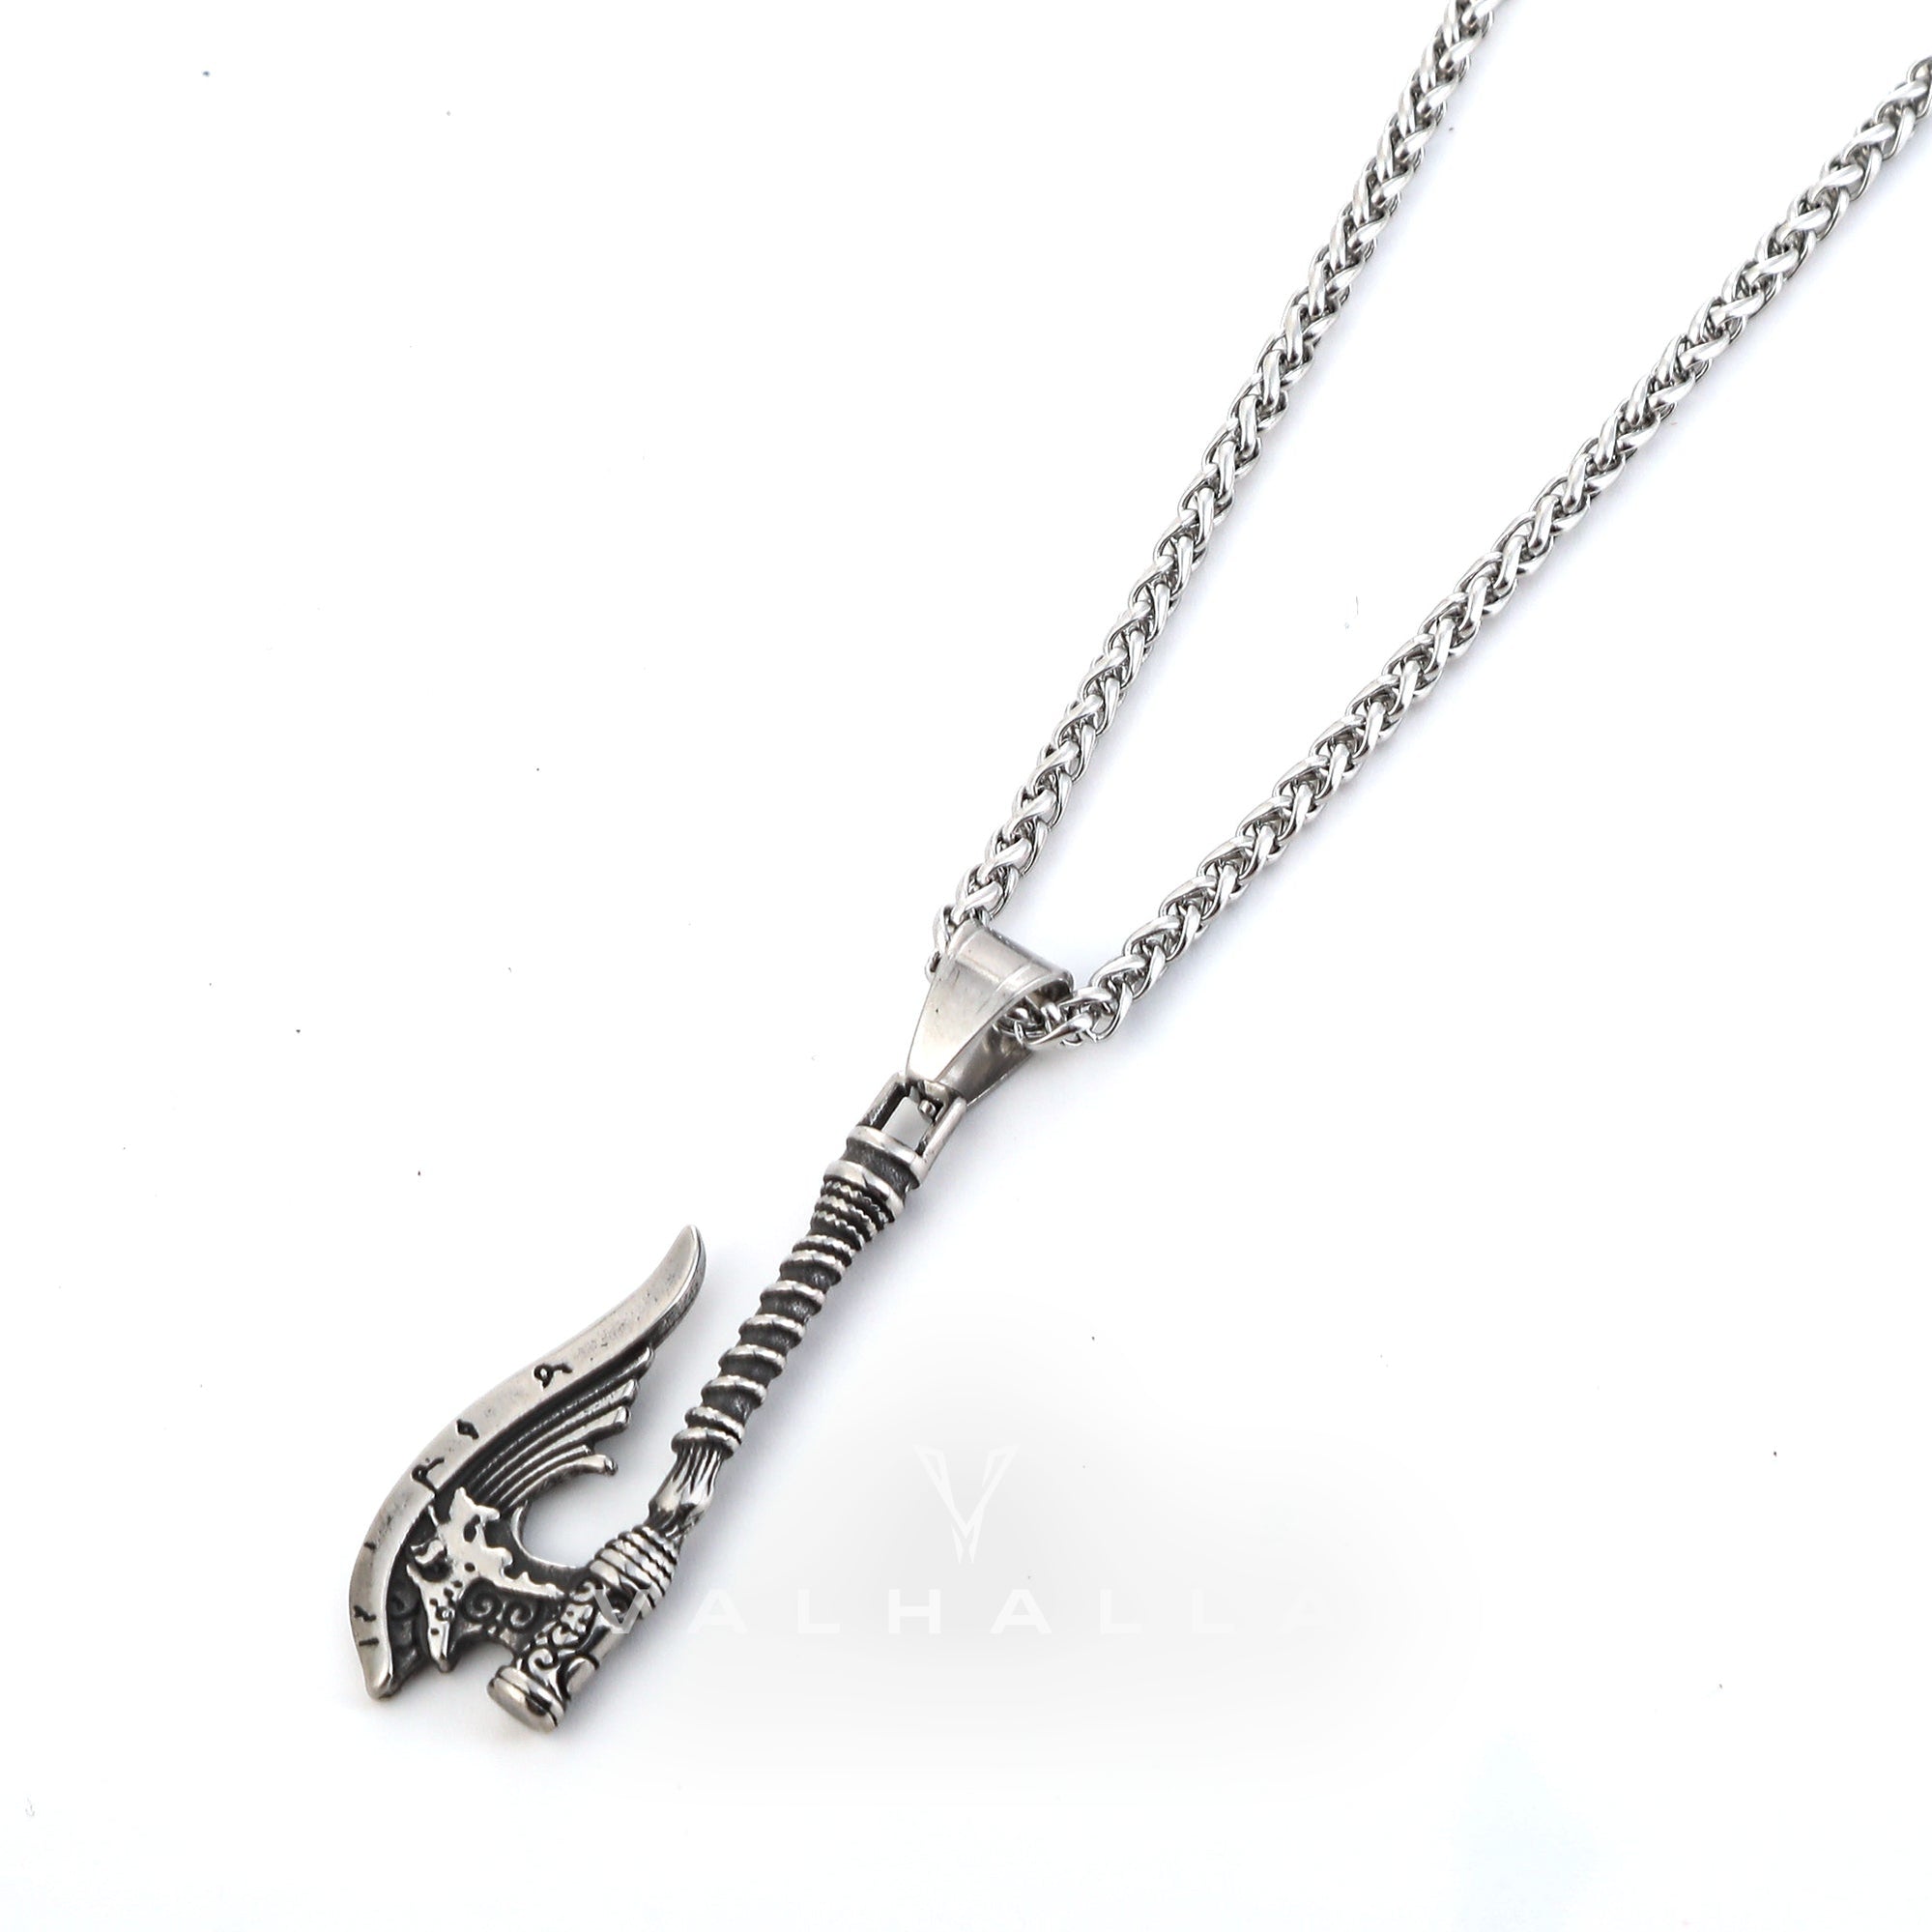 Handcrafted Stainless Steel Viking Axe Necklace